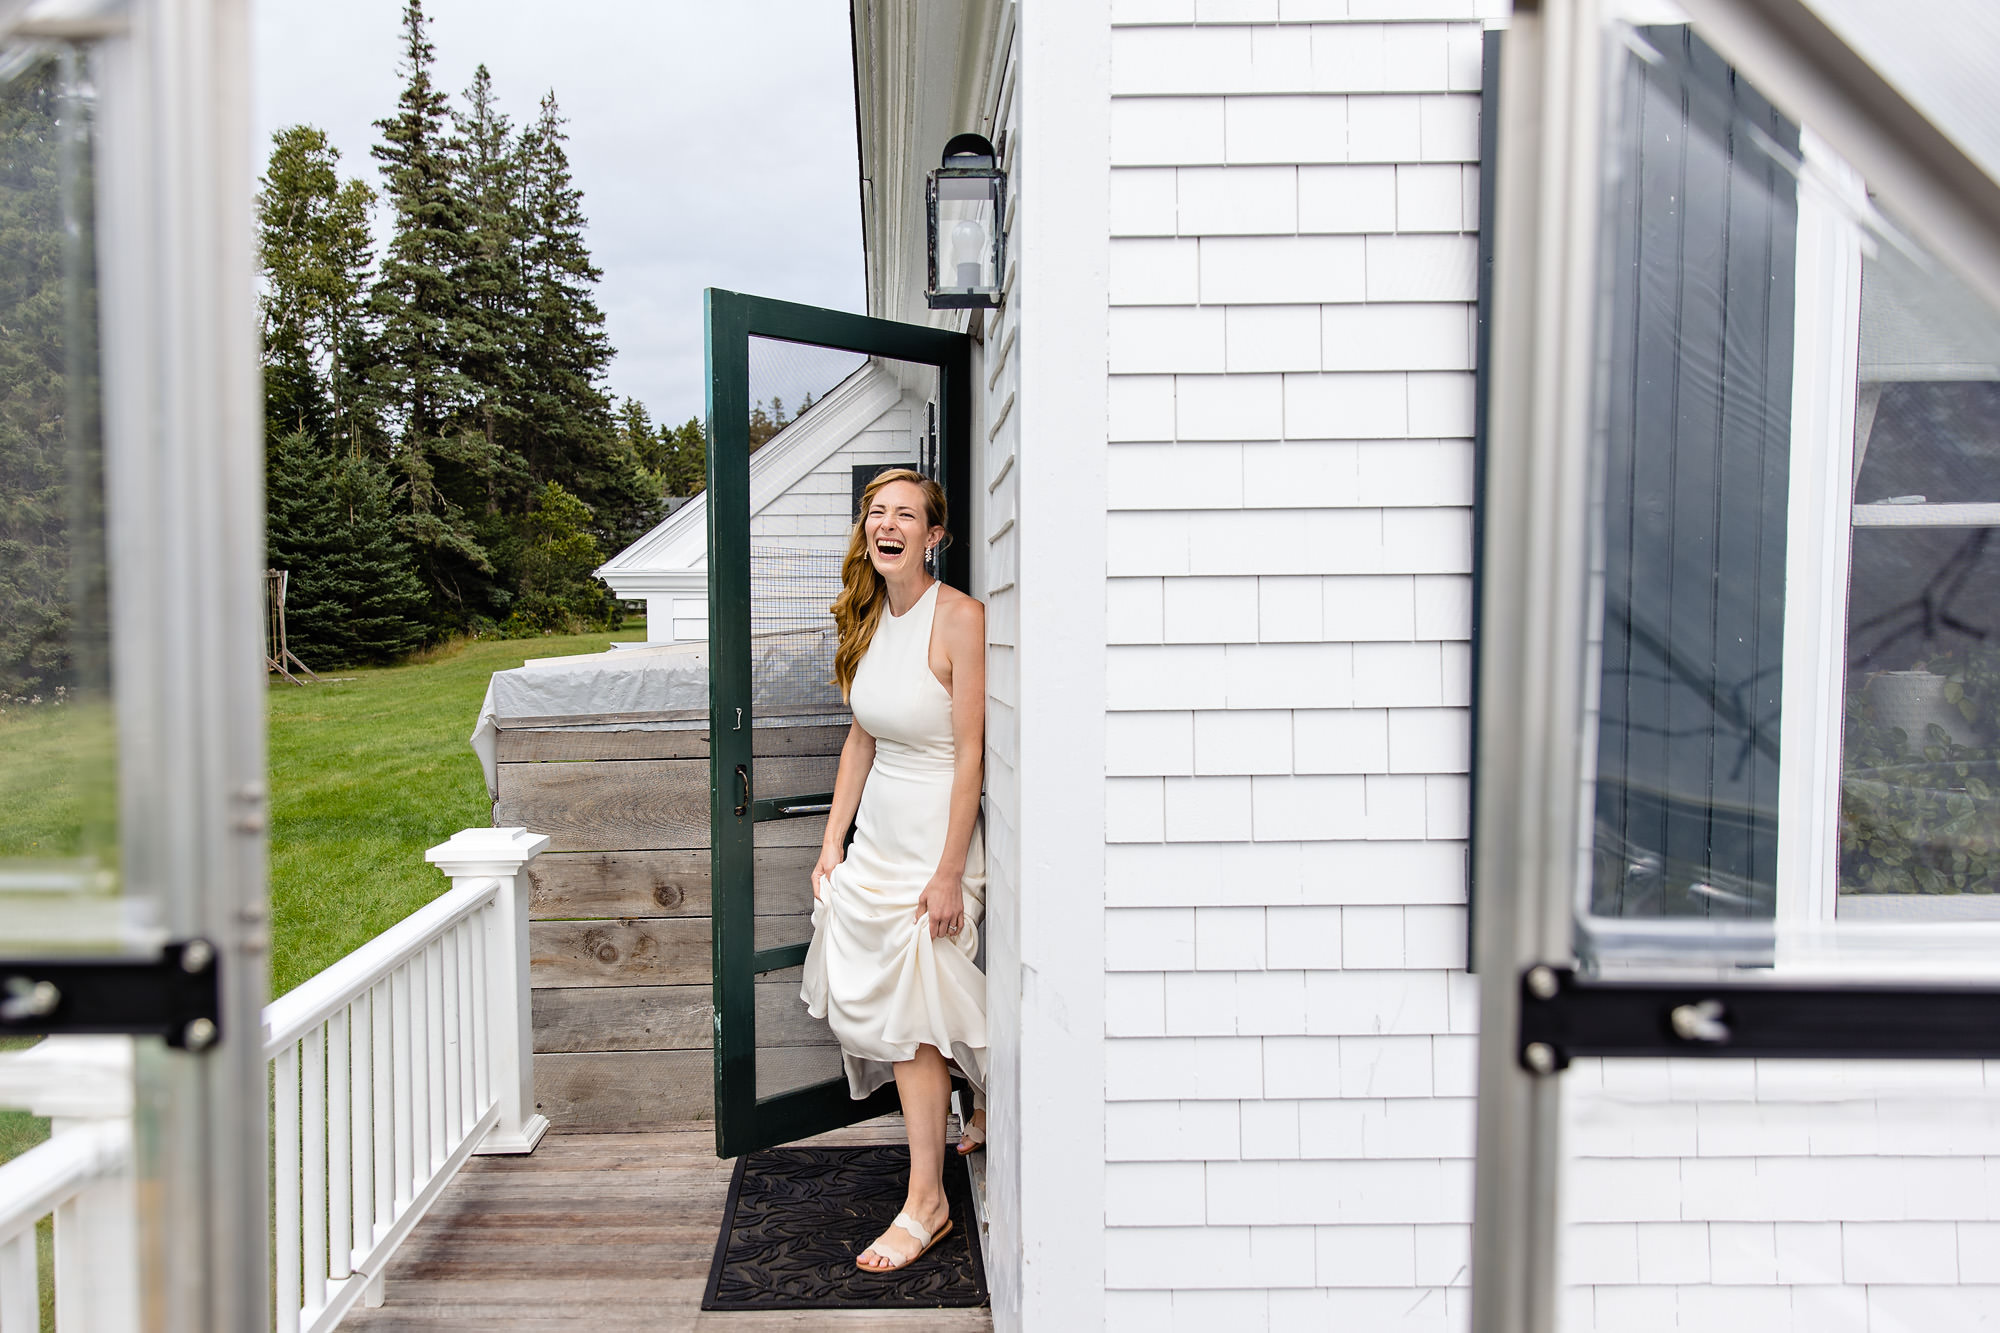 Chloe and Will share a first look at their coastal MDI private residence wedding